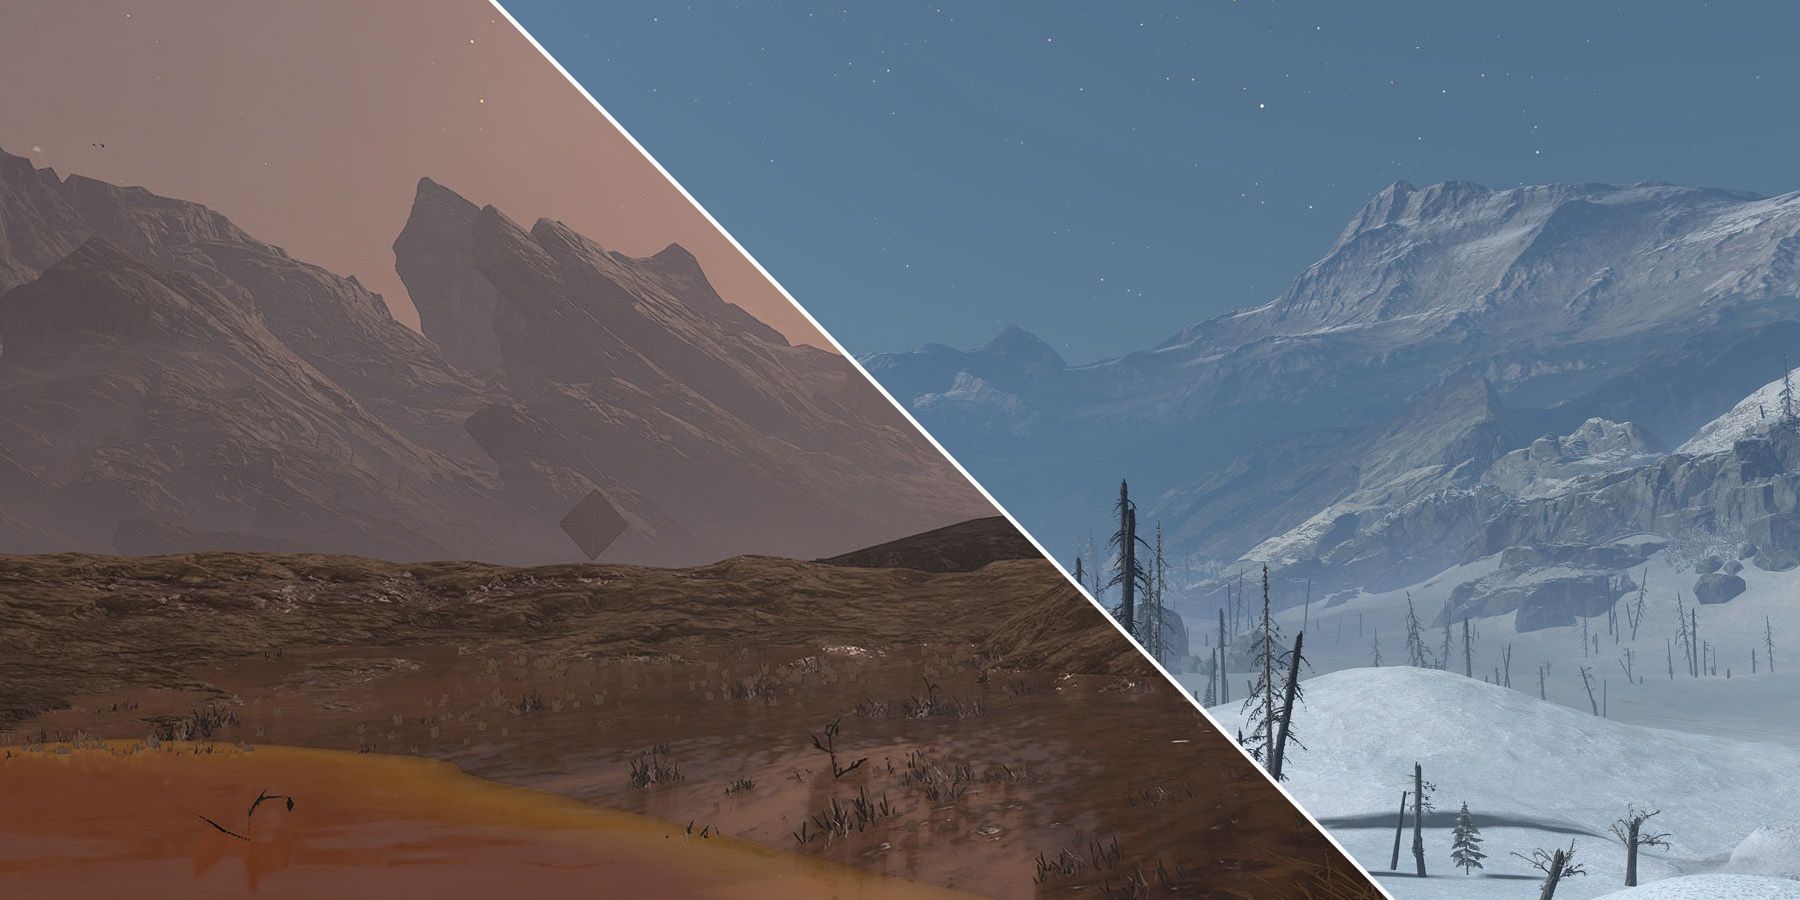 Deadlands and Permafrost biomes in Halo Infinite's Forge.